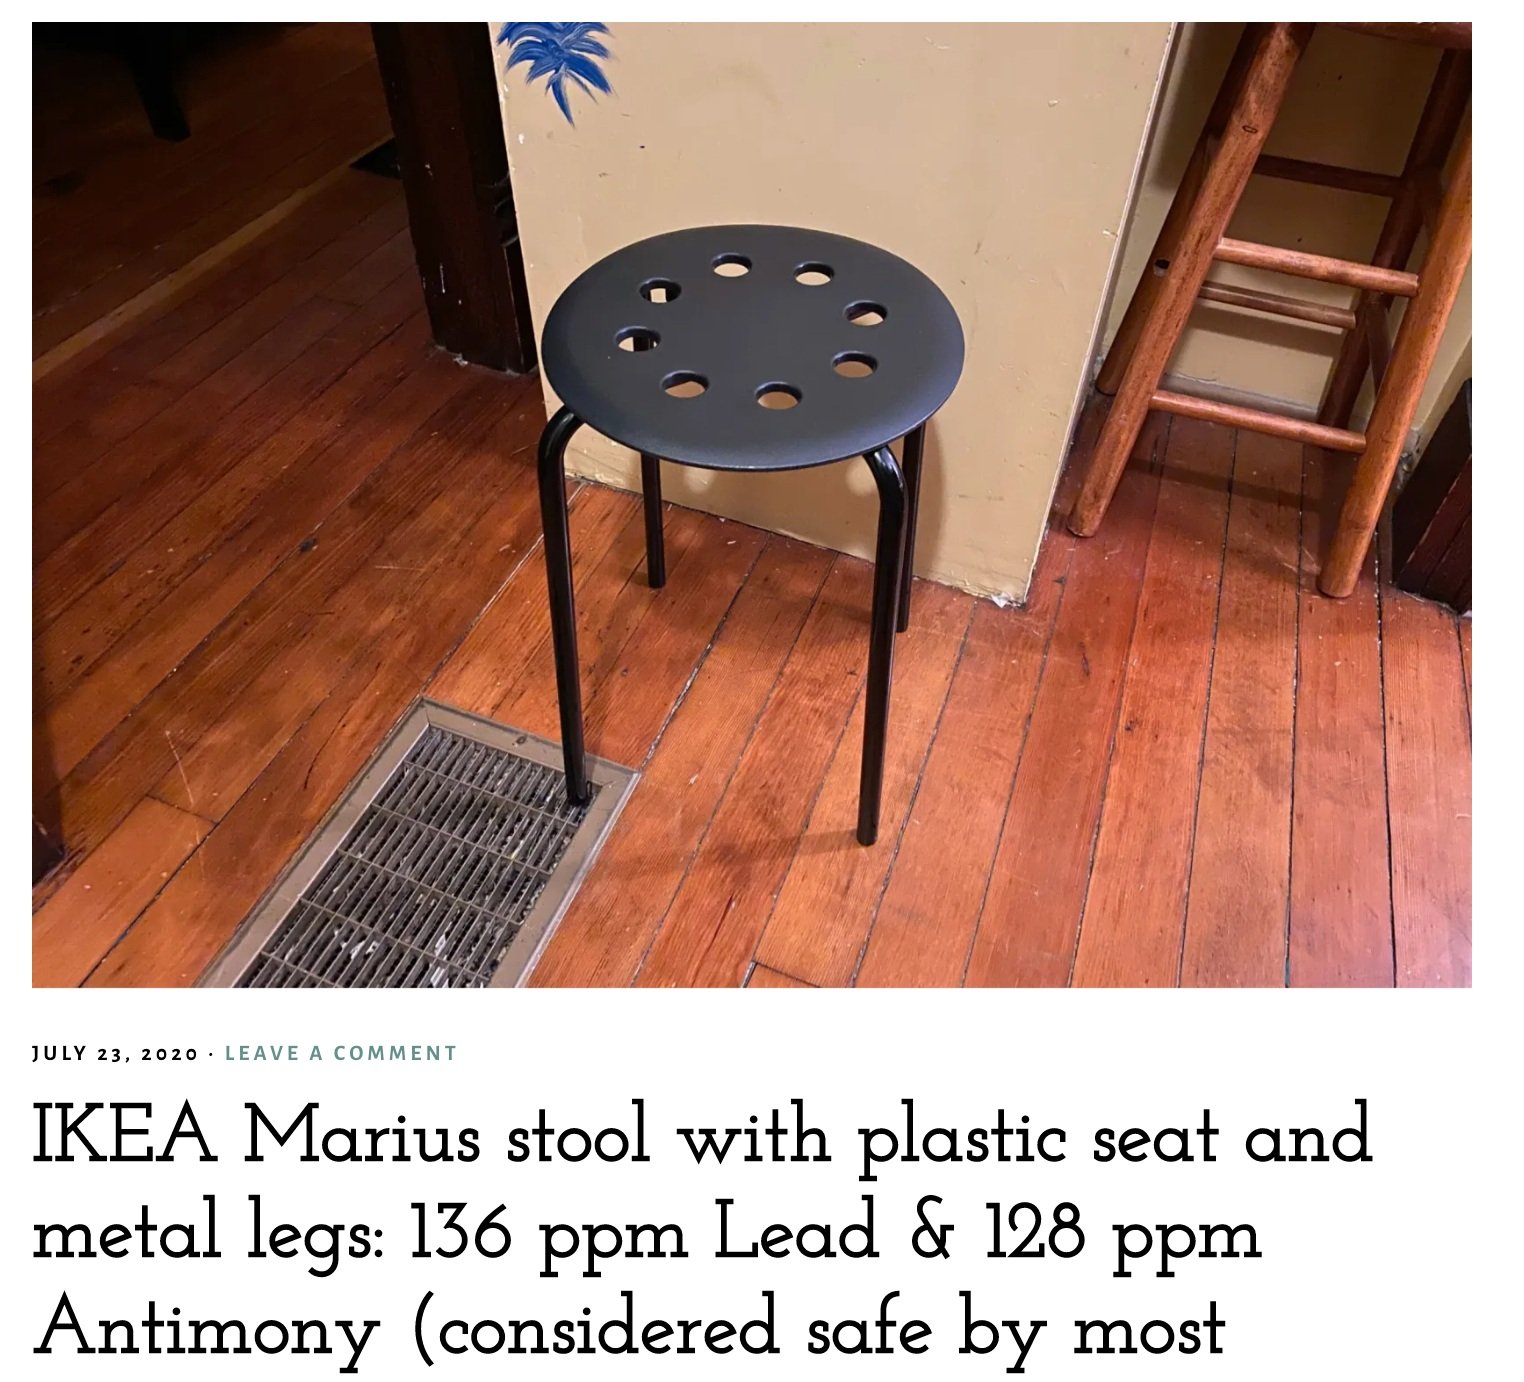 many furniture items contain lead